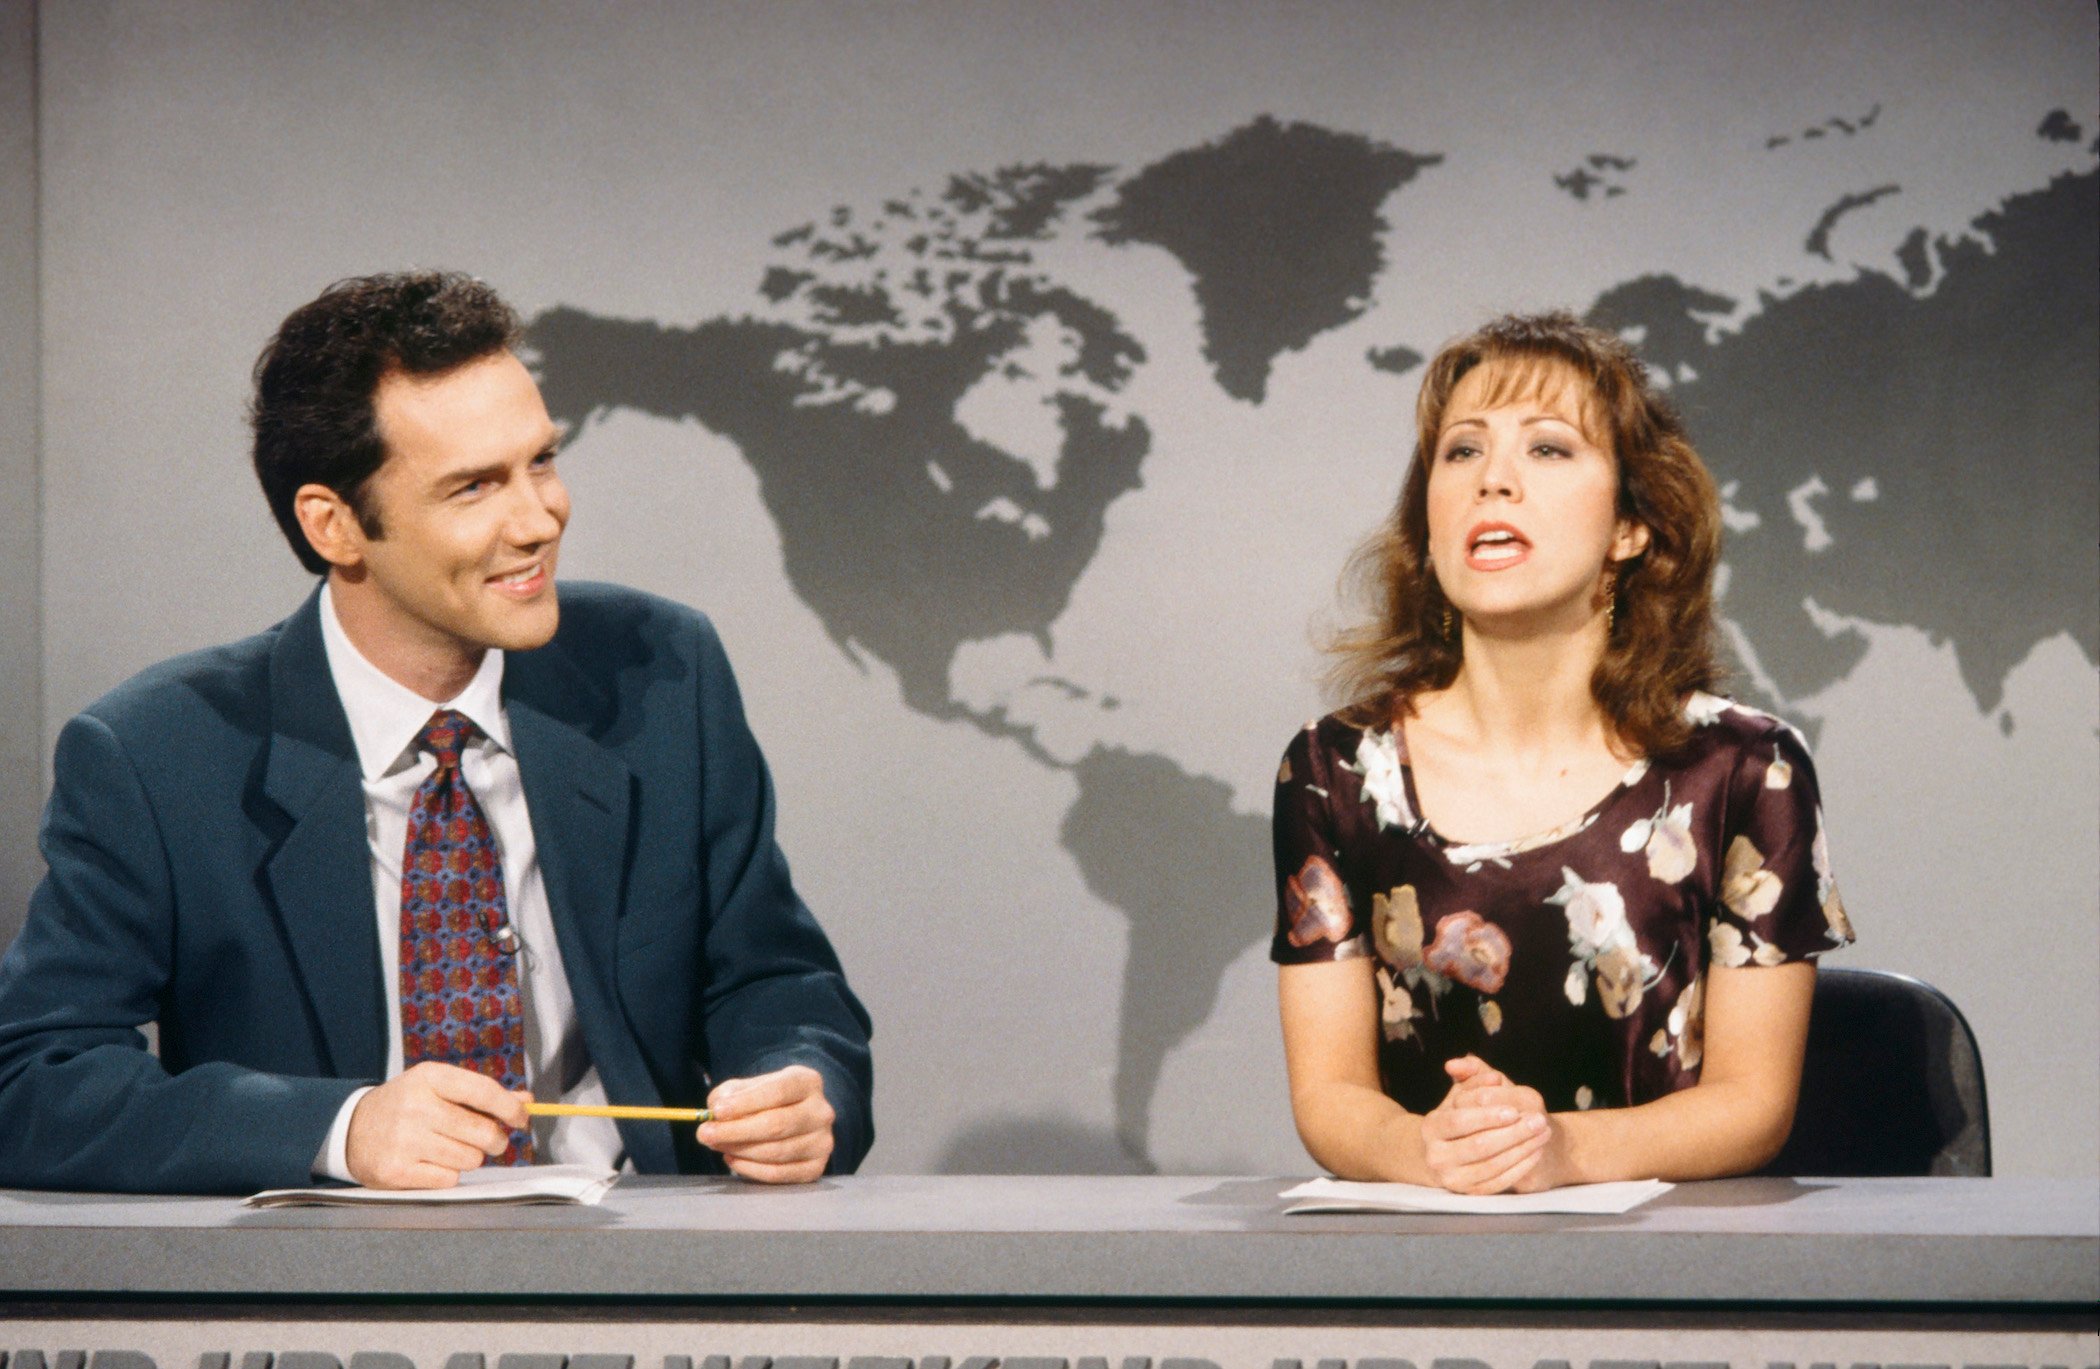 Norm MacDonald and Cheri Oteri during 'Weekend Update' skit. Norm Macdonald's net worth skyrocketed thanks to 'Saturday Night Live'